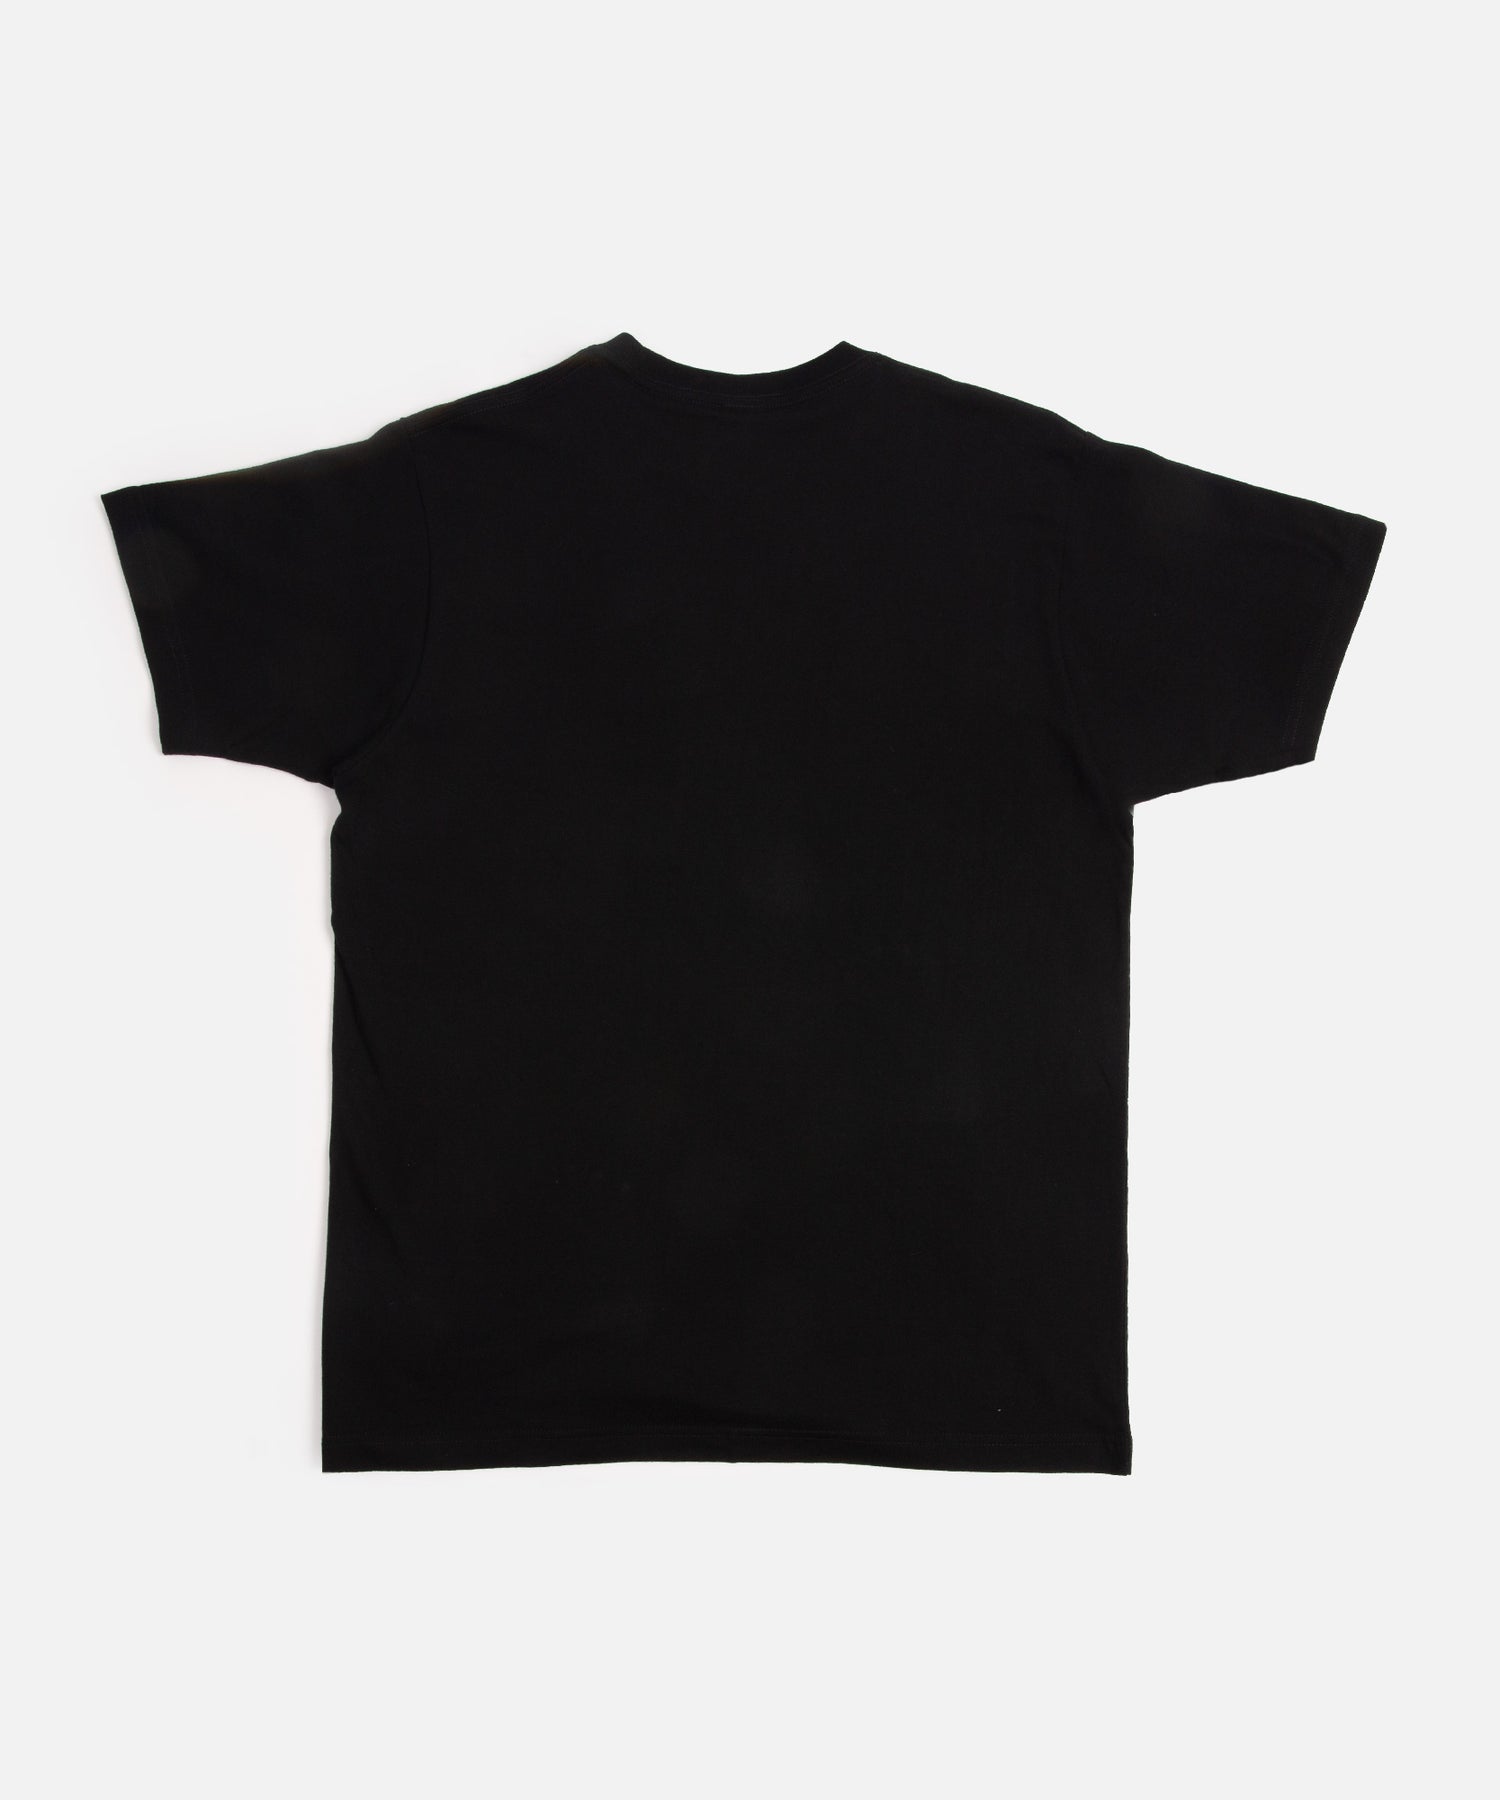 IN-STORE EXCLUSIVE: Patta Amsterdam Chapter T-Shirt (Black)